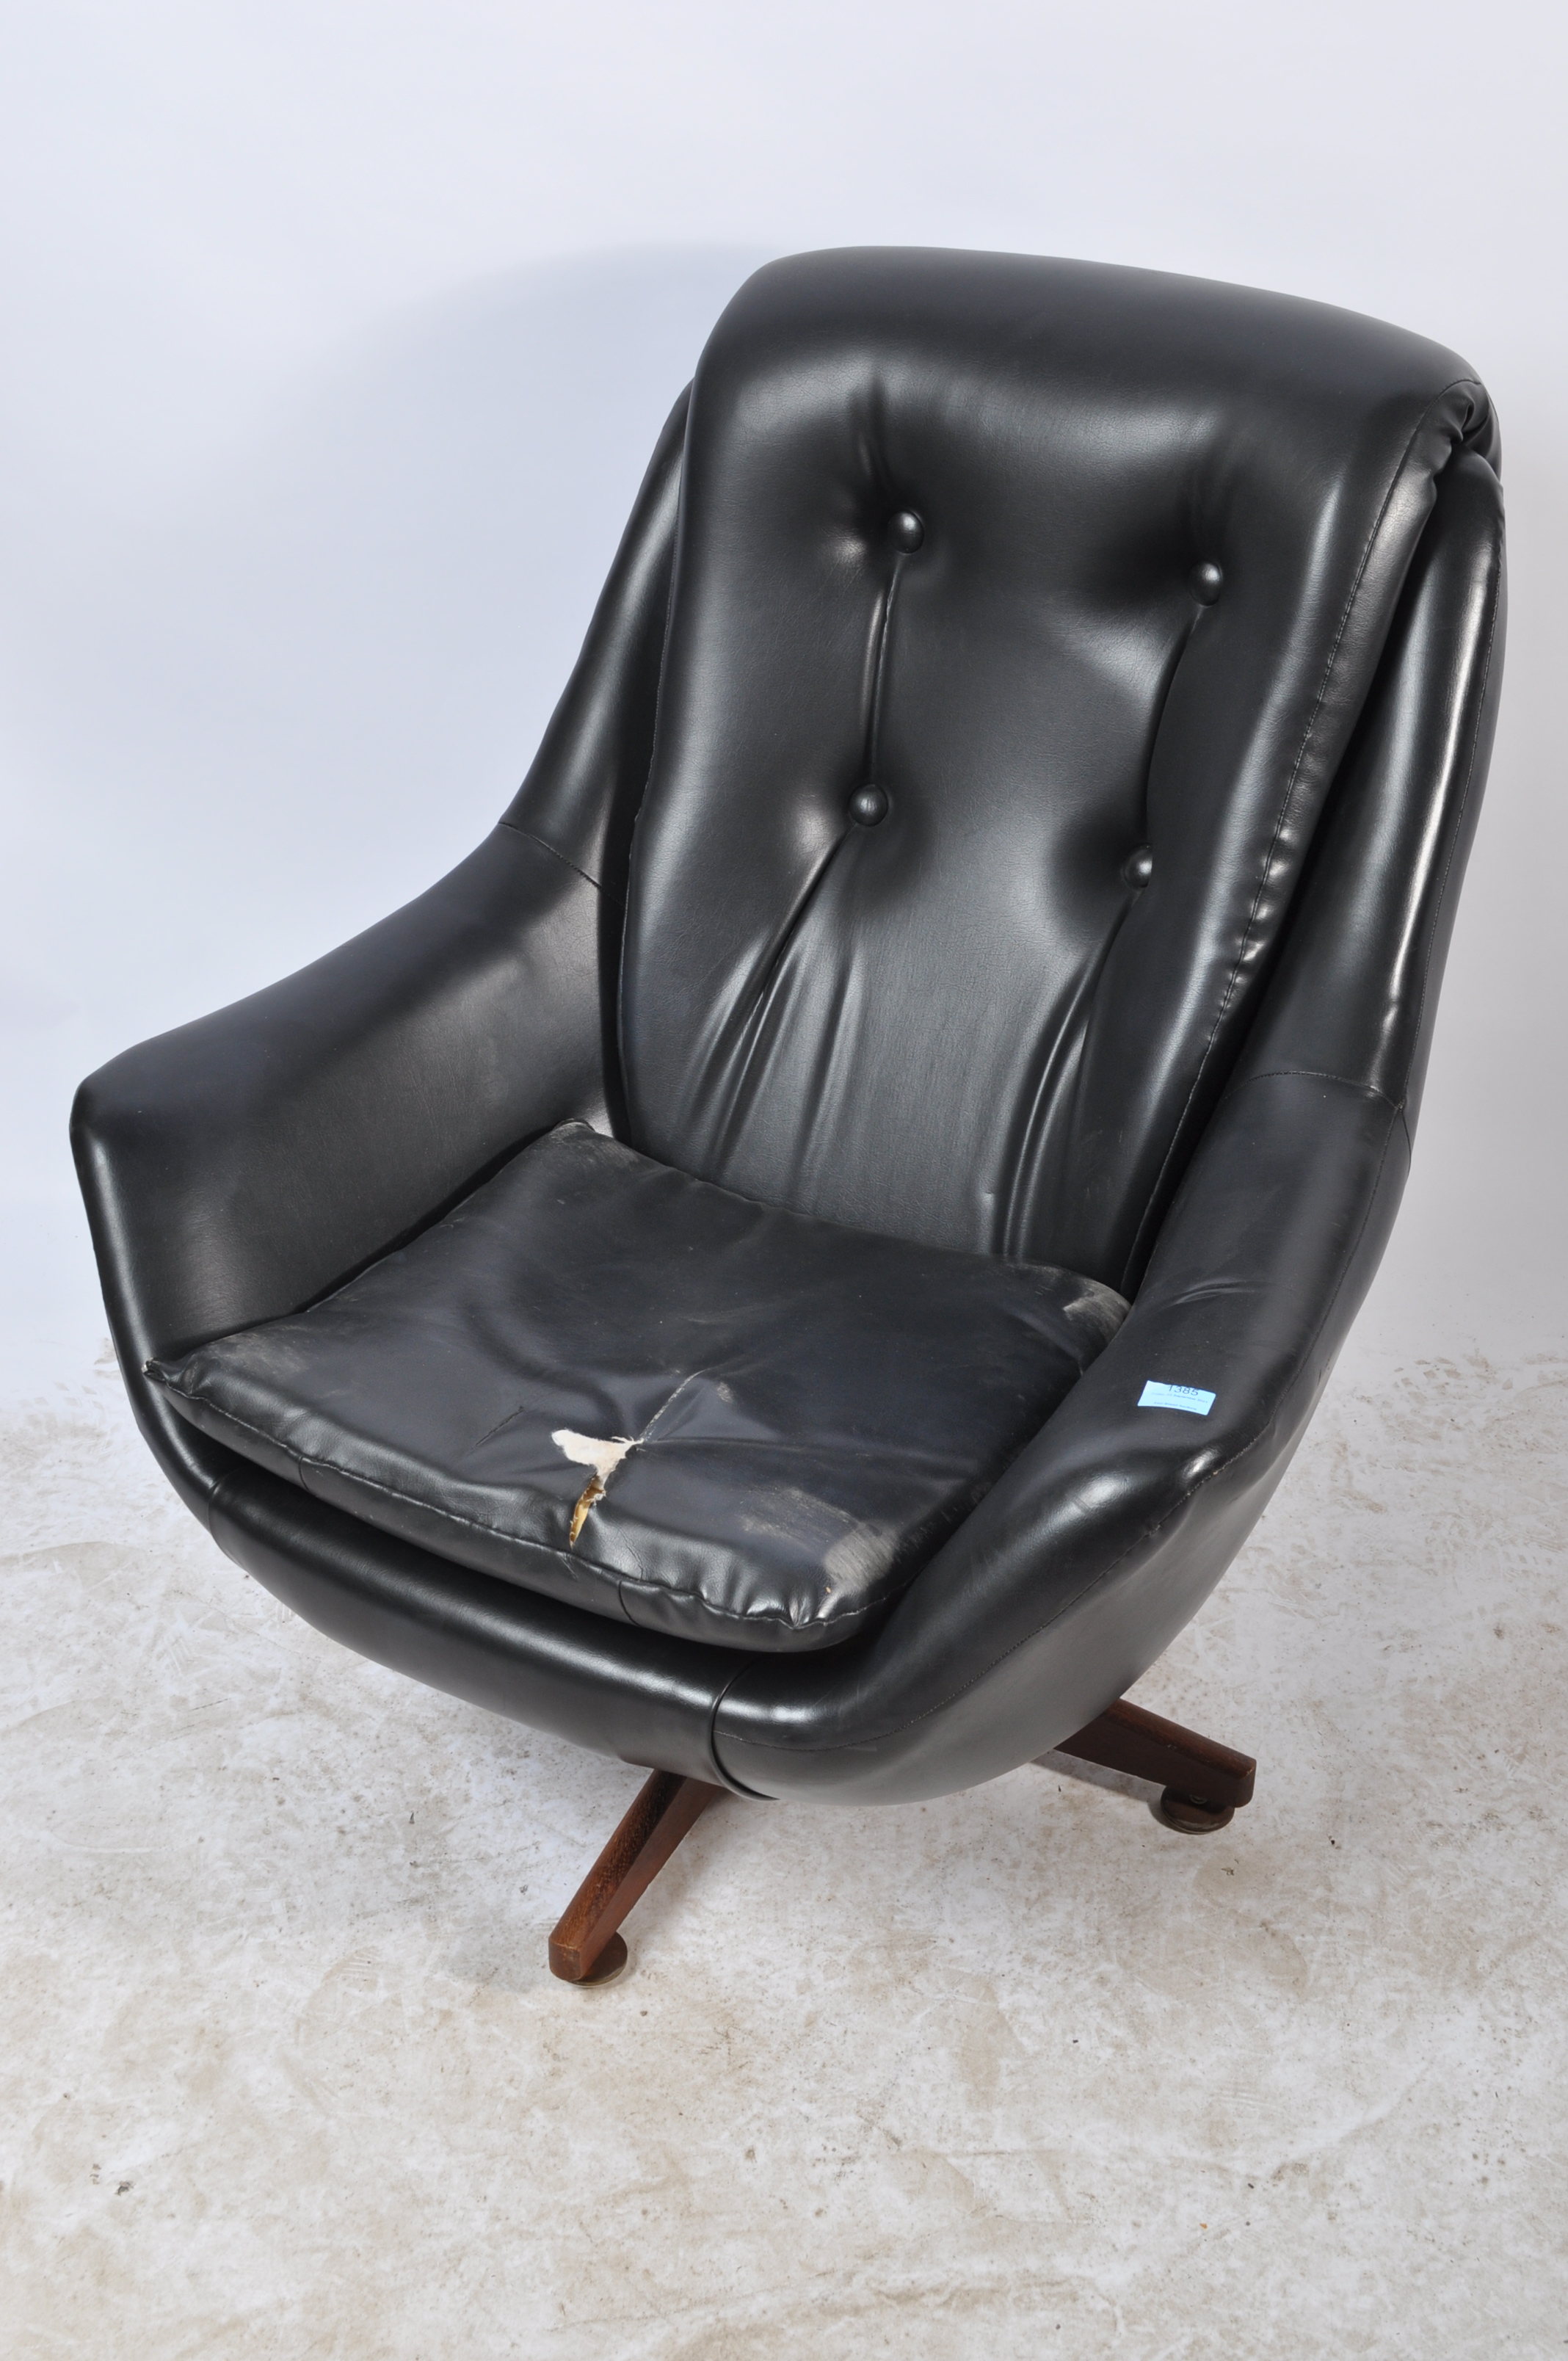 VINTAGE 20TH CENTURY BLACK LEATHER EGG CHAIR - Image 2 of 4